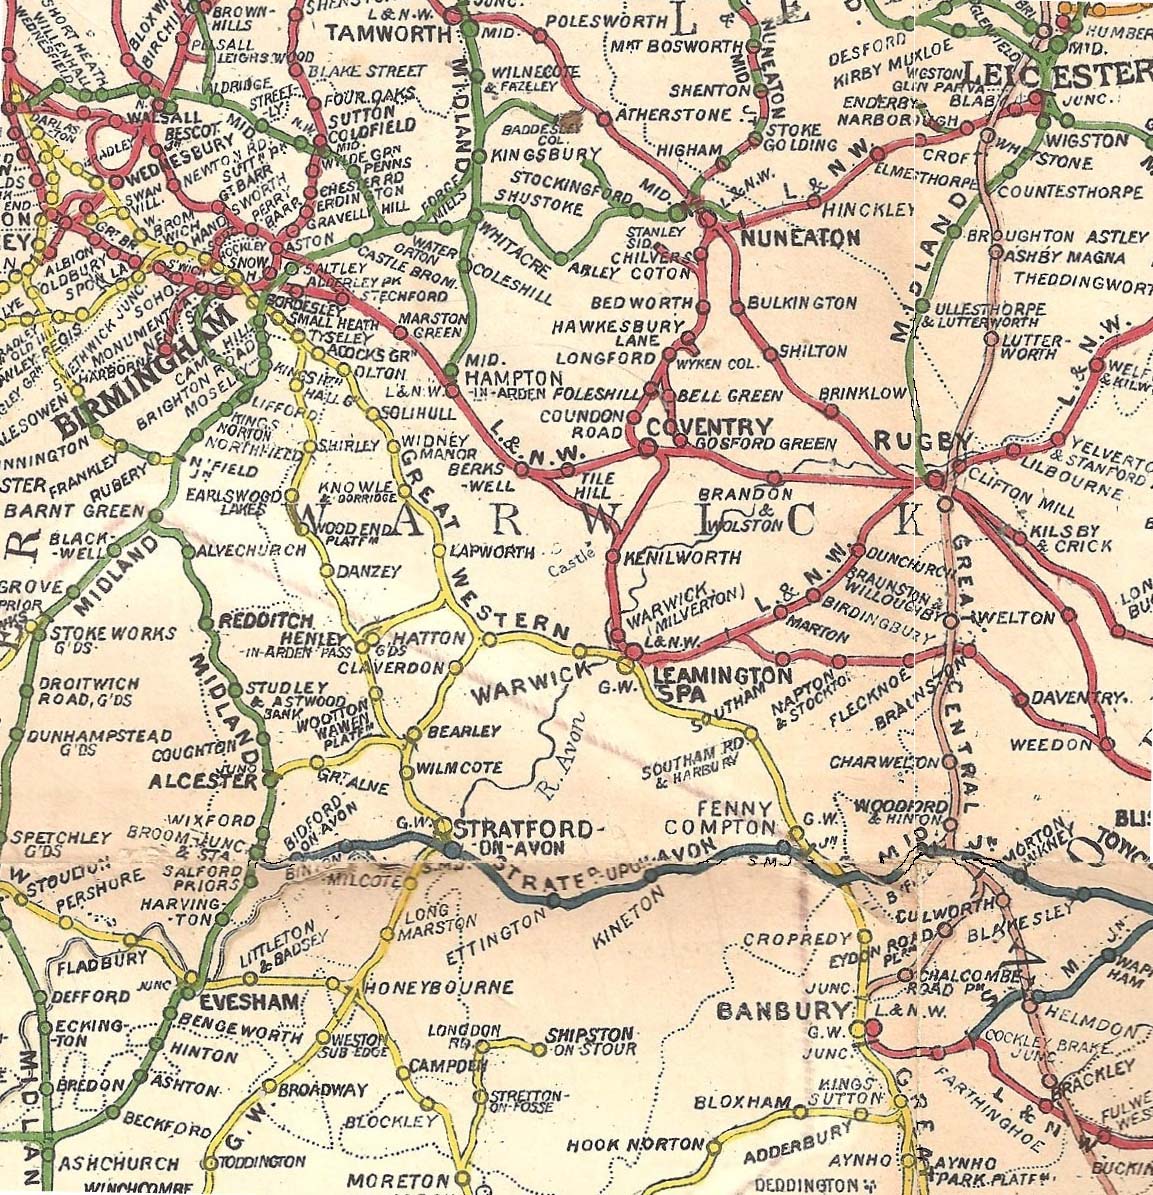 1909 Railway Clearing House Map - Showing stations in and around the County of Warwickshire